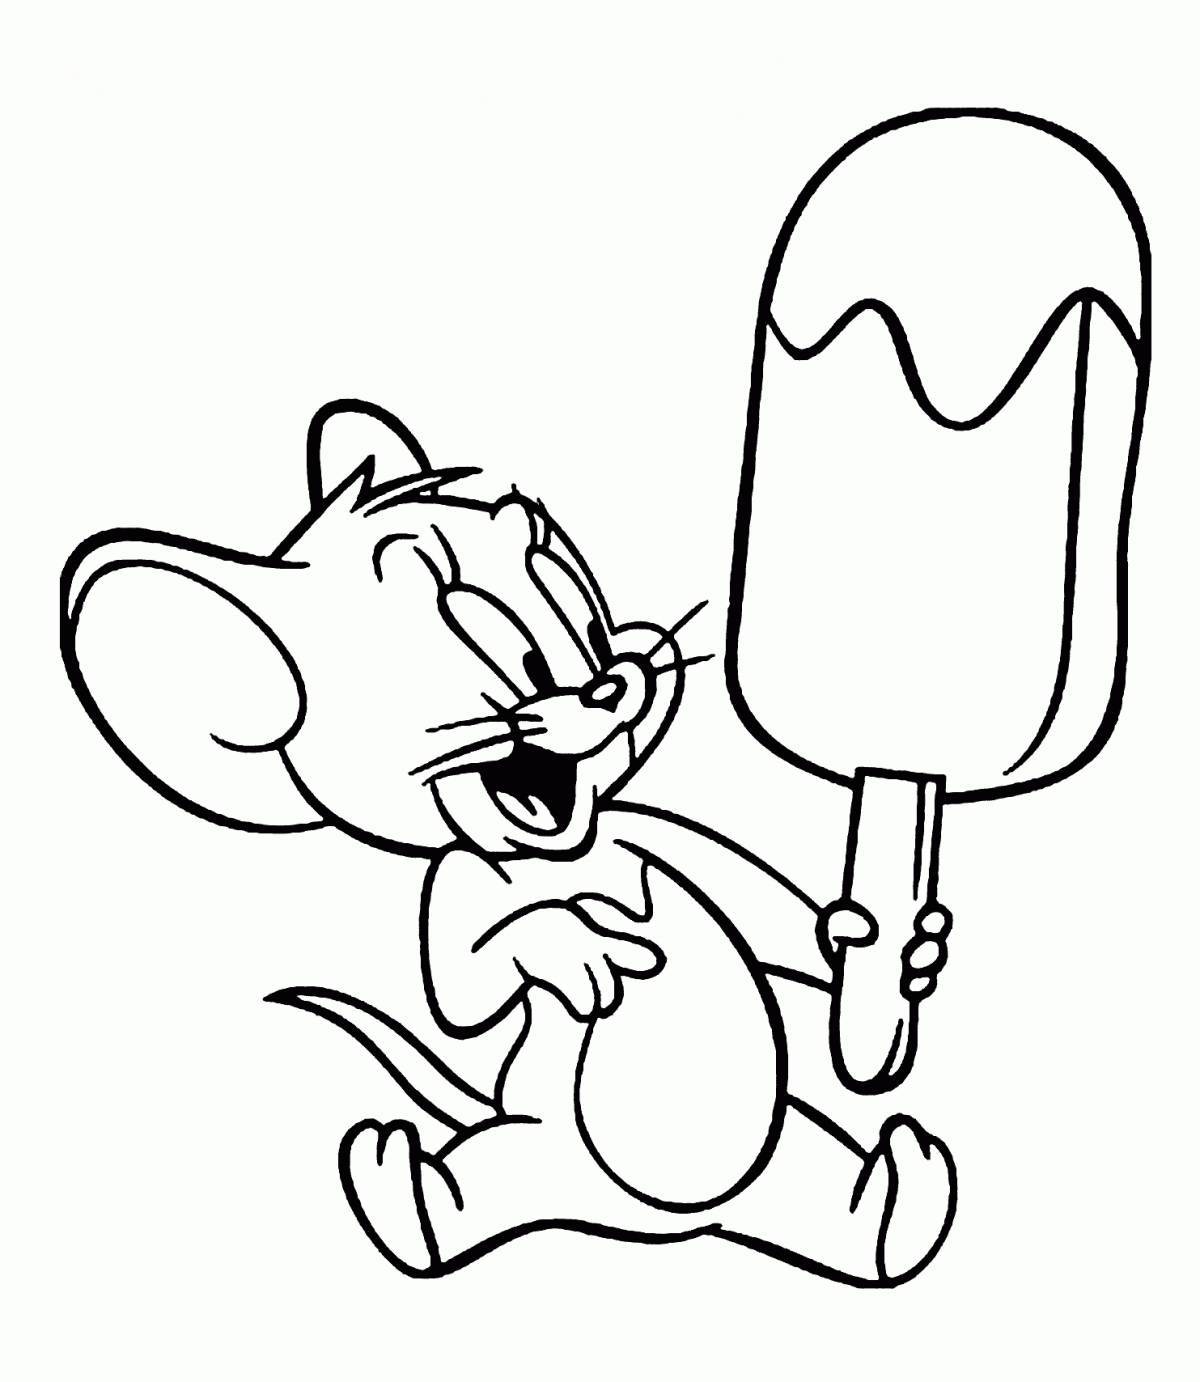 Fun tom and jerry coloring pages for kids